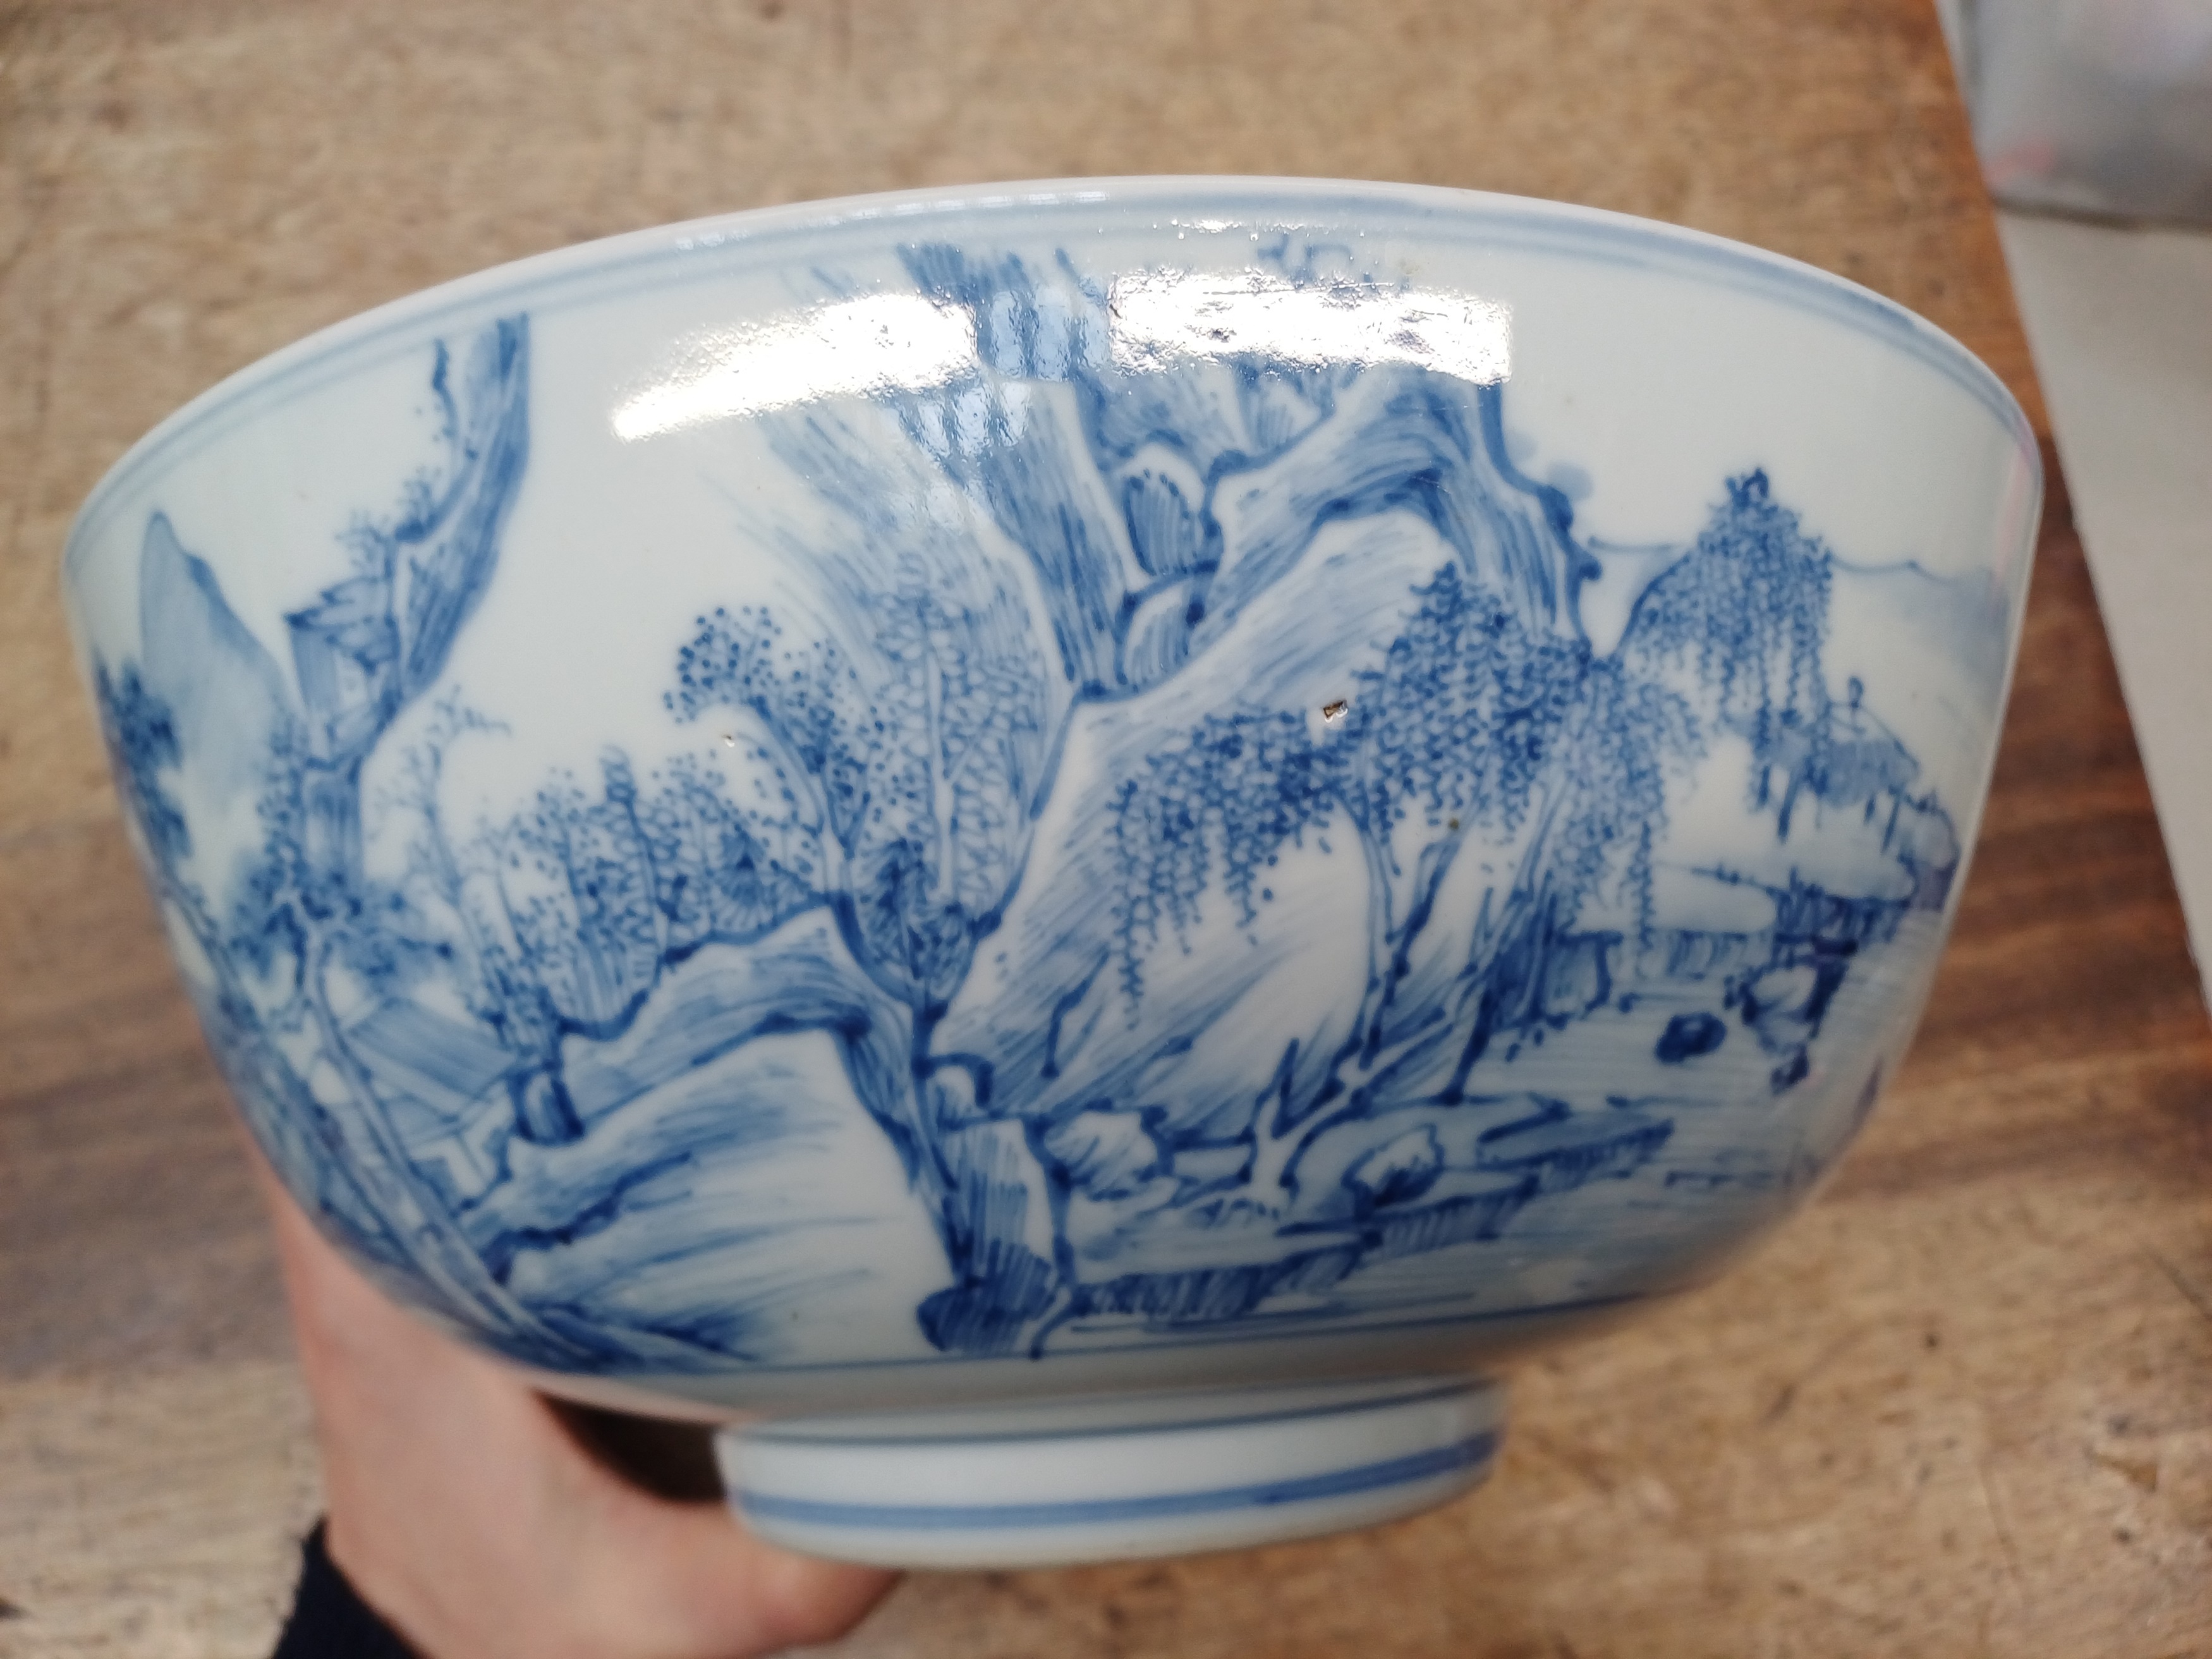 A RARE CHINESE BLUE AND WHITE 'MASTER OF THE ROCKS' BOWL 清康熙或雍正 青花山水人物圖紋盌 - Image 11 of 19